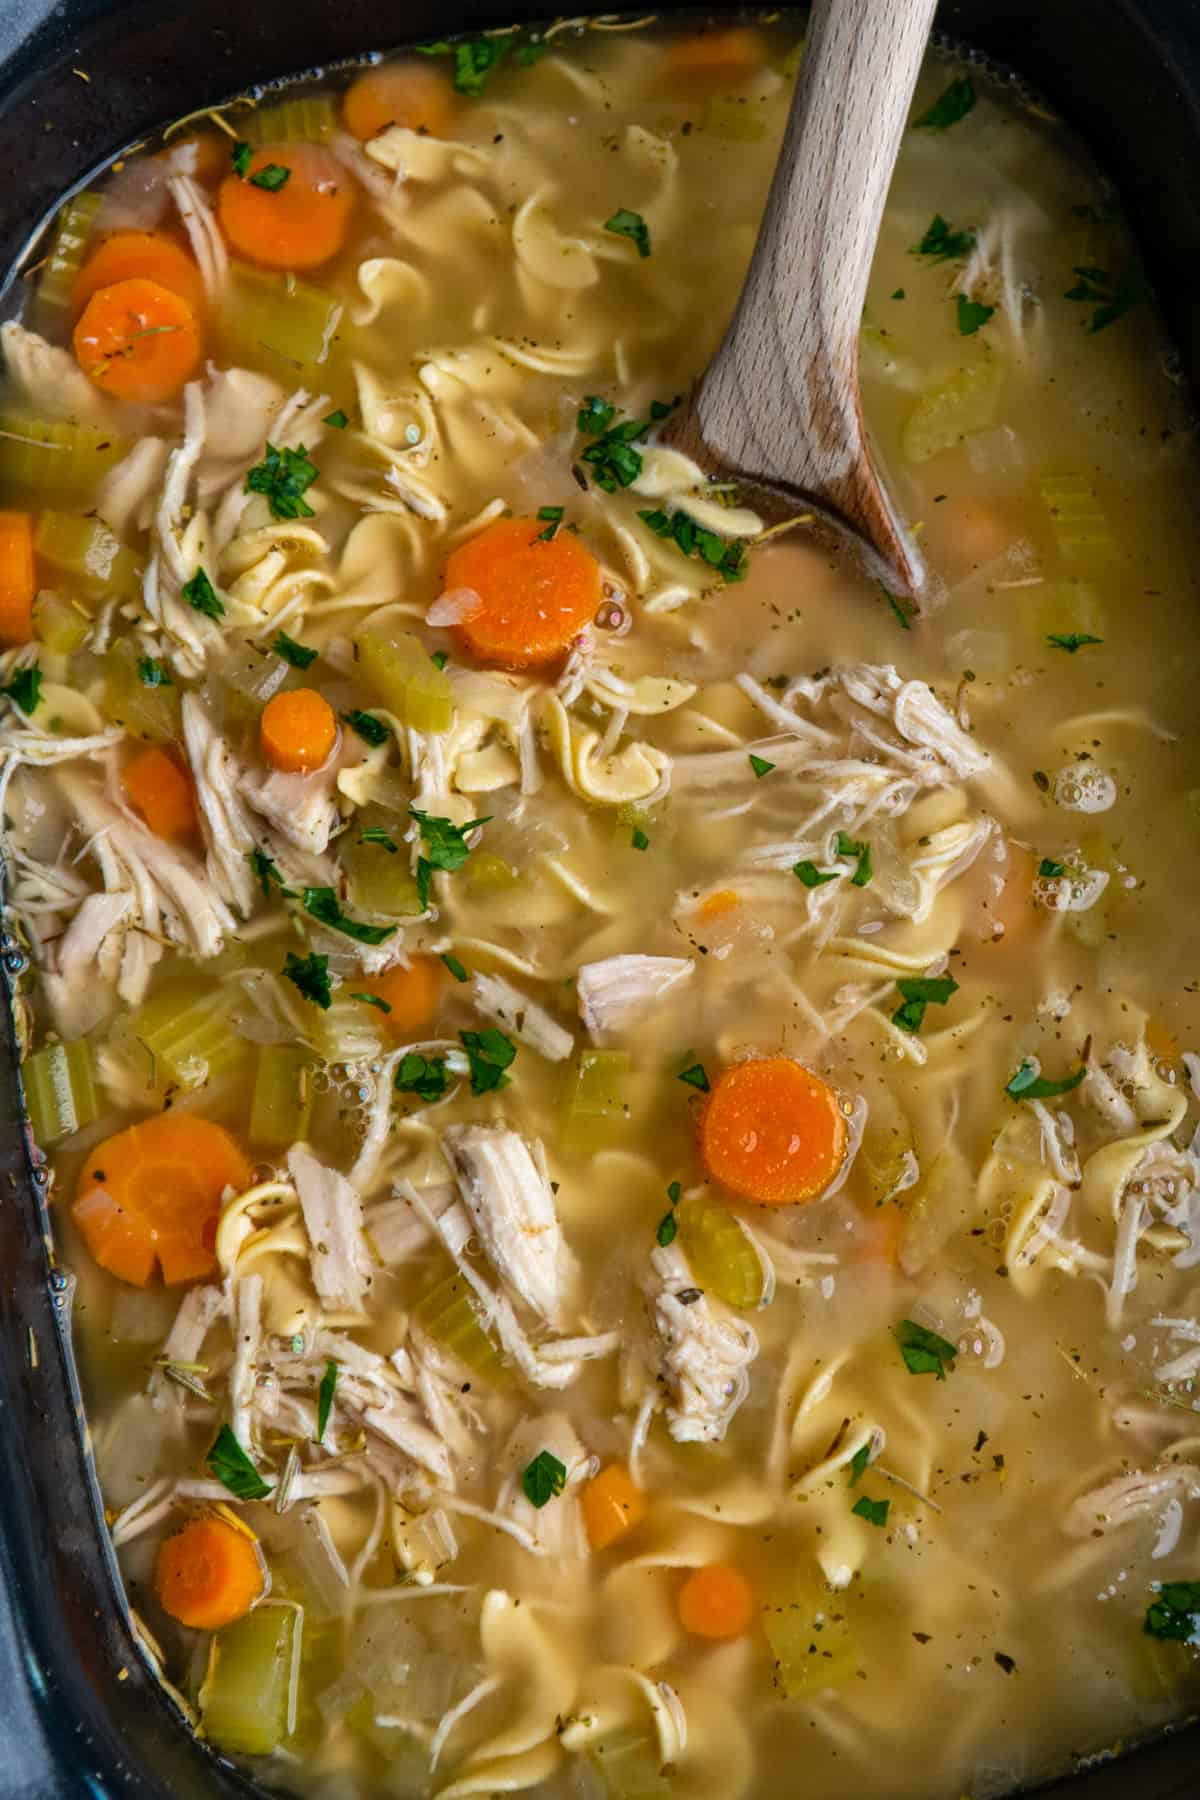 Overhead look at chicken noodle soup in a slow cooker with a wooden spoon in it.